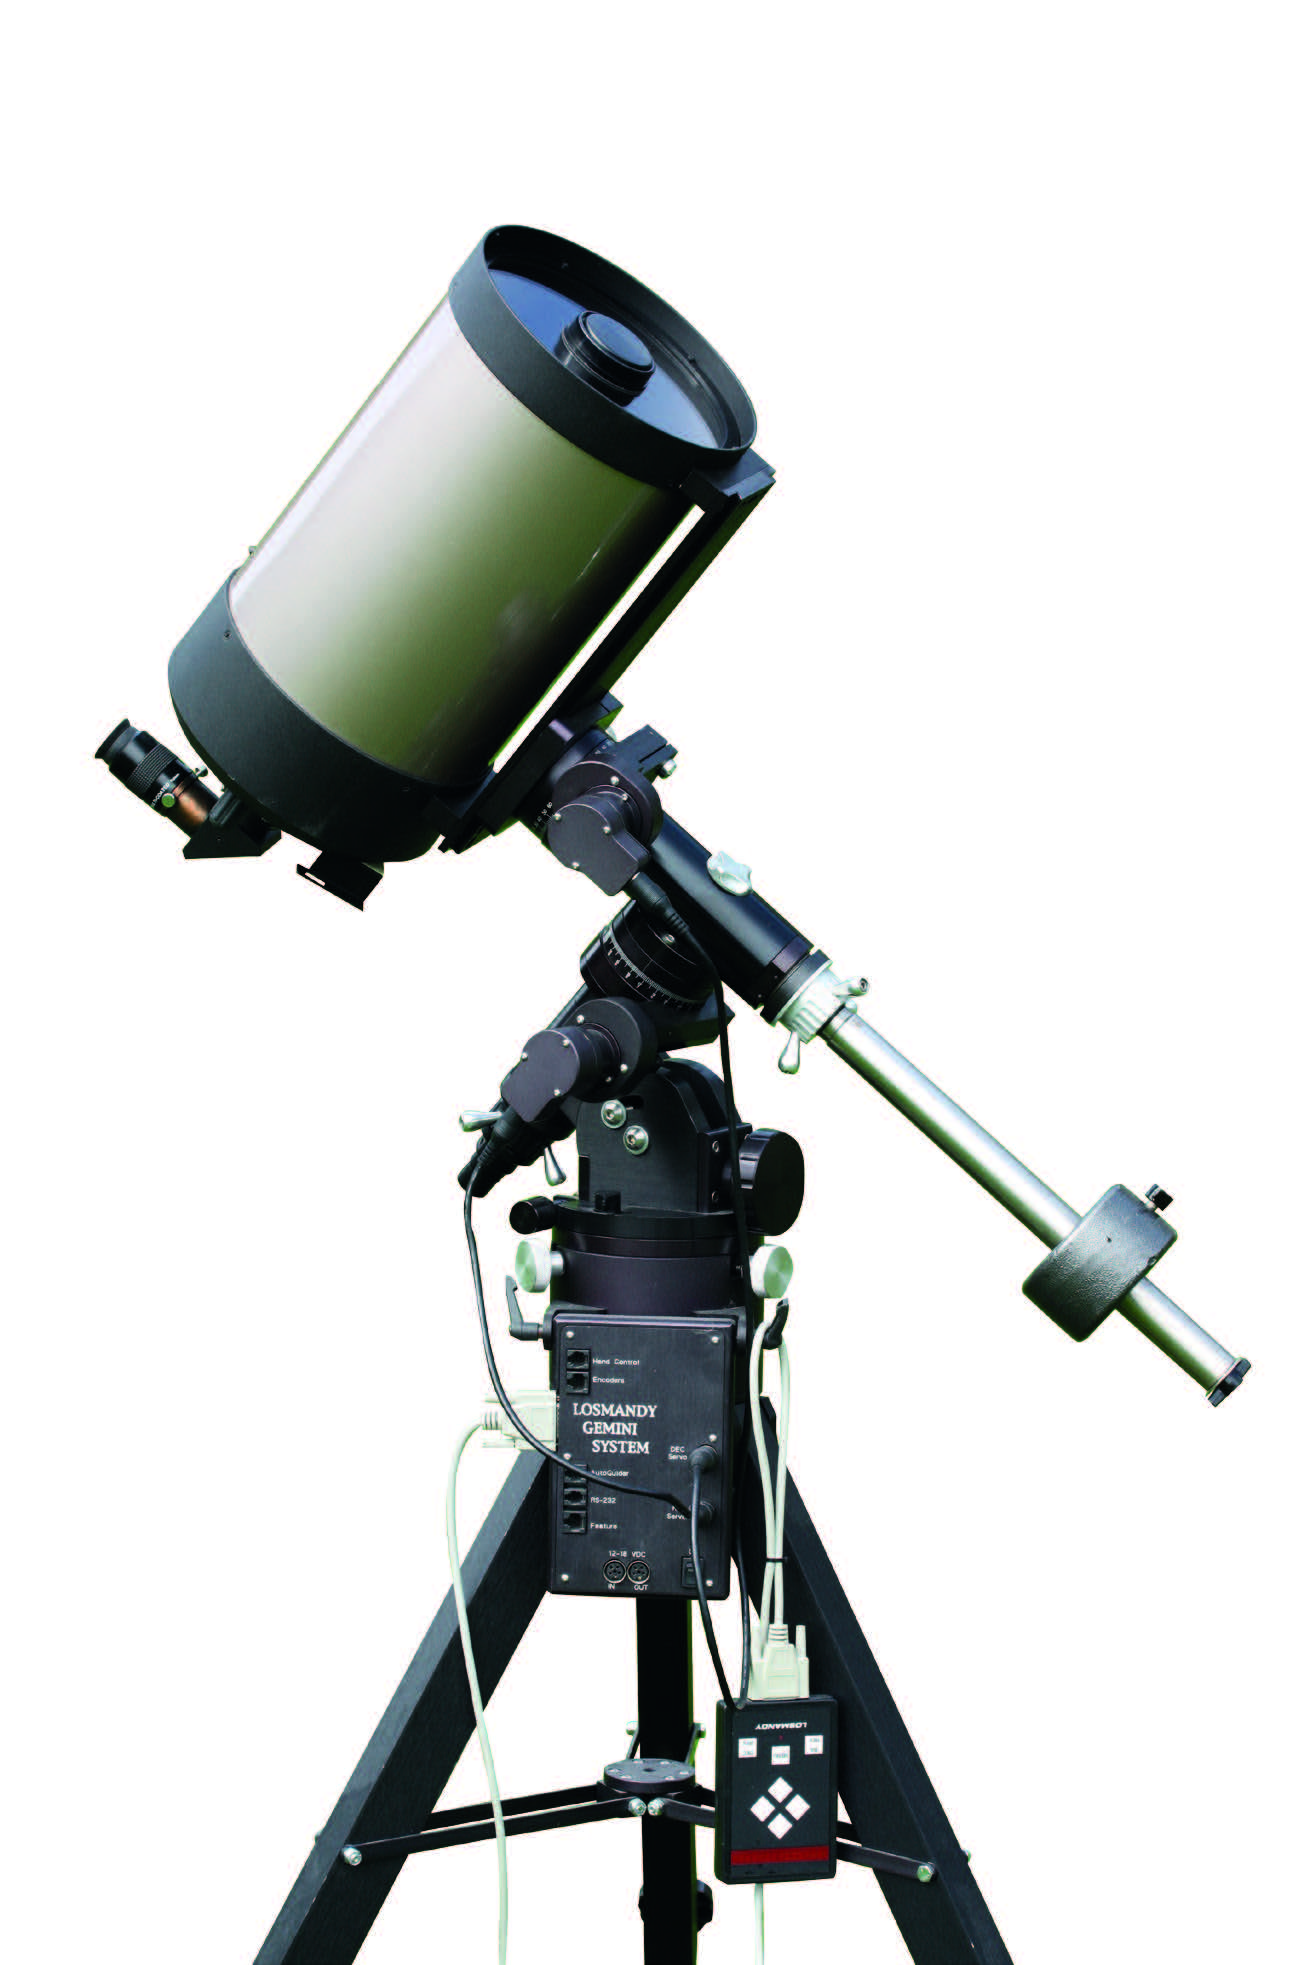 Here, a Schmidt Cassegrain telescope on a Losmandy GM-8 German mount is used for observing the Moon and planets. The mount is considerably more solid and therefore offers better load-bearing capability than the lightweight mount shown in picture 2. Both axes of this mount are motorised, and the mount also has GoTo functionality, which makes it possible to navigate to numerous celestial objects by computer control.